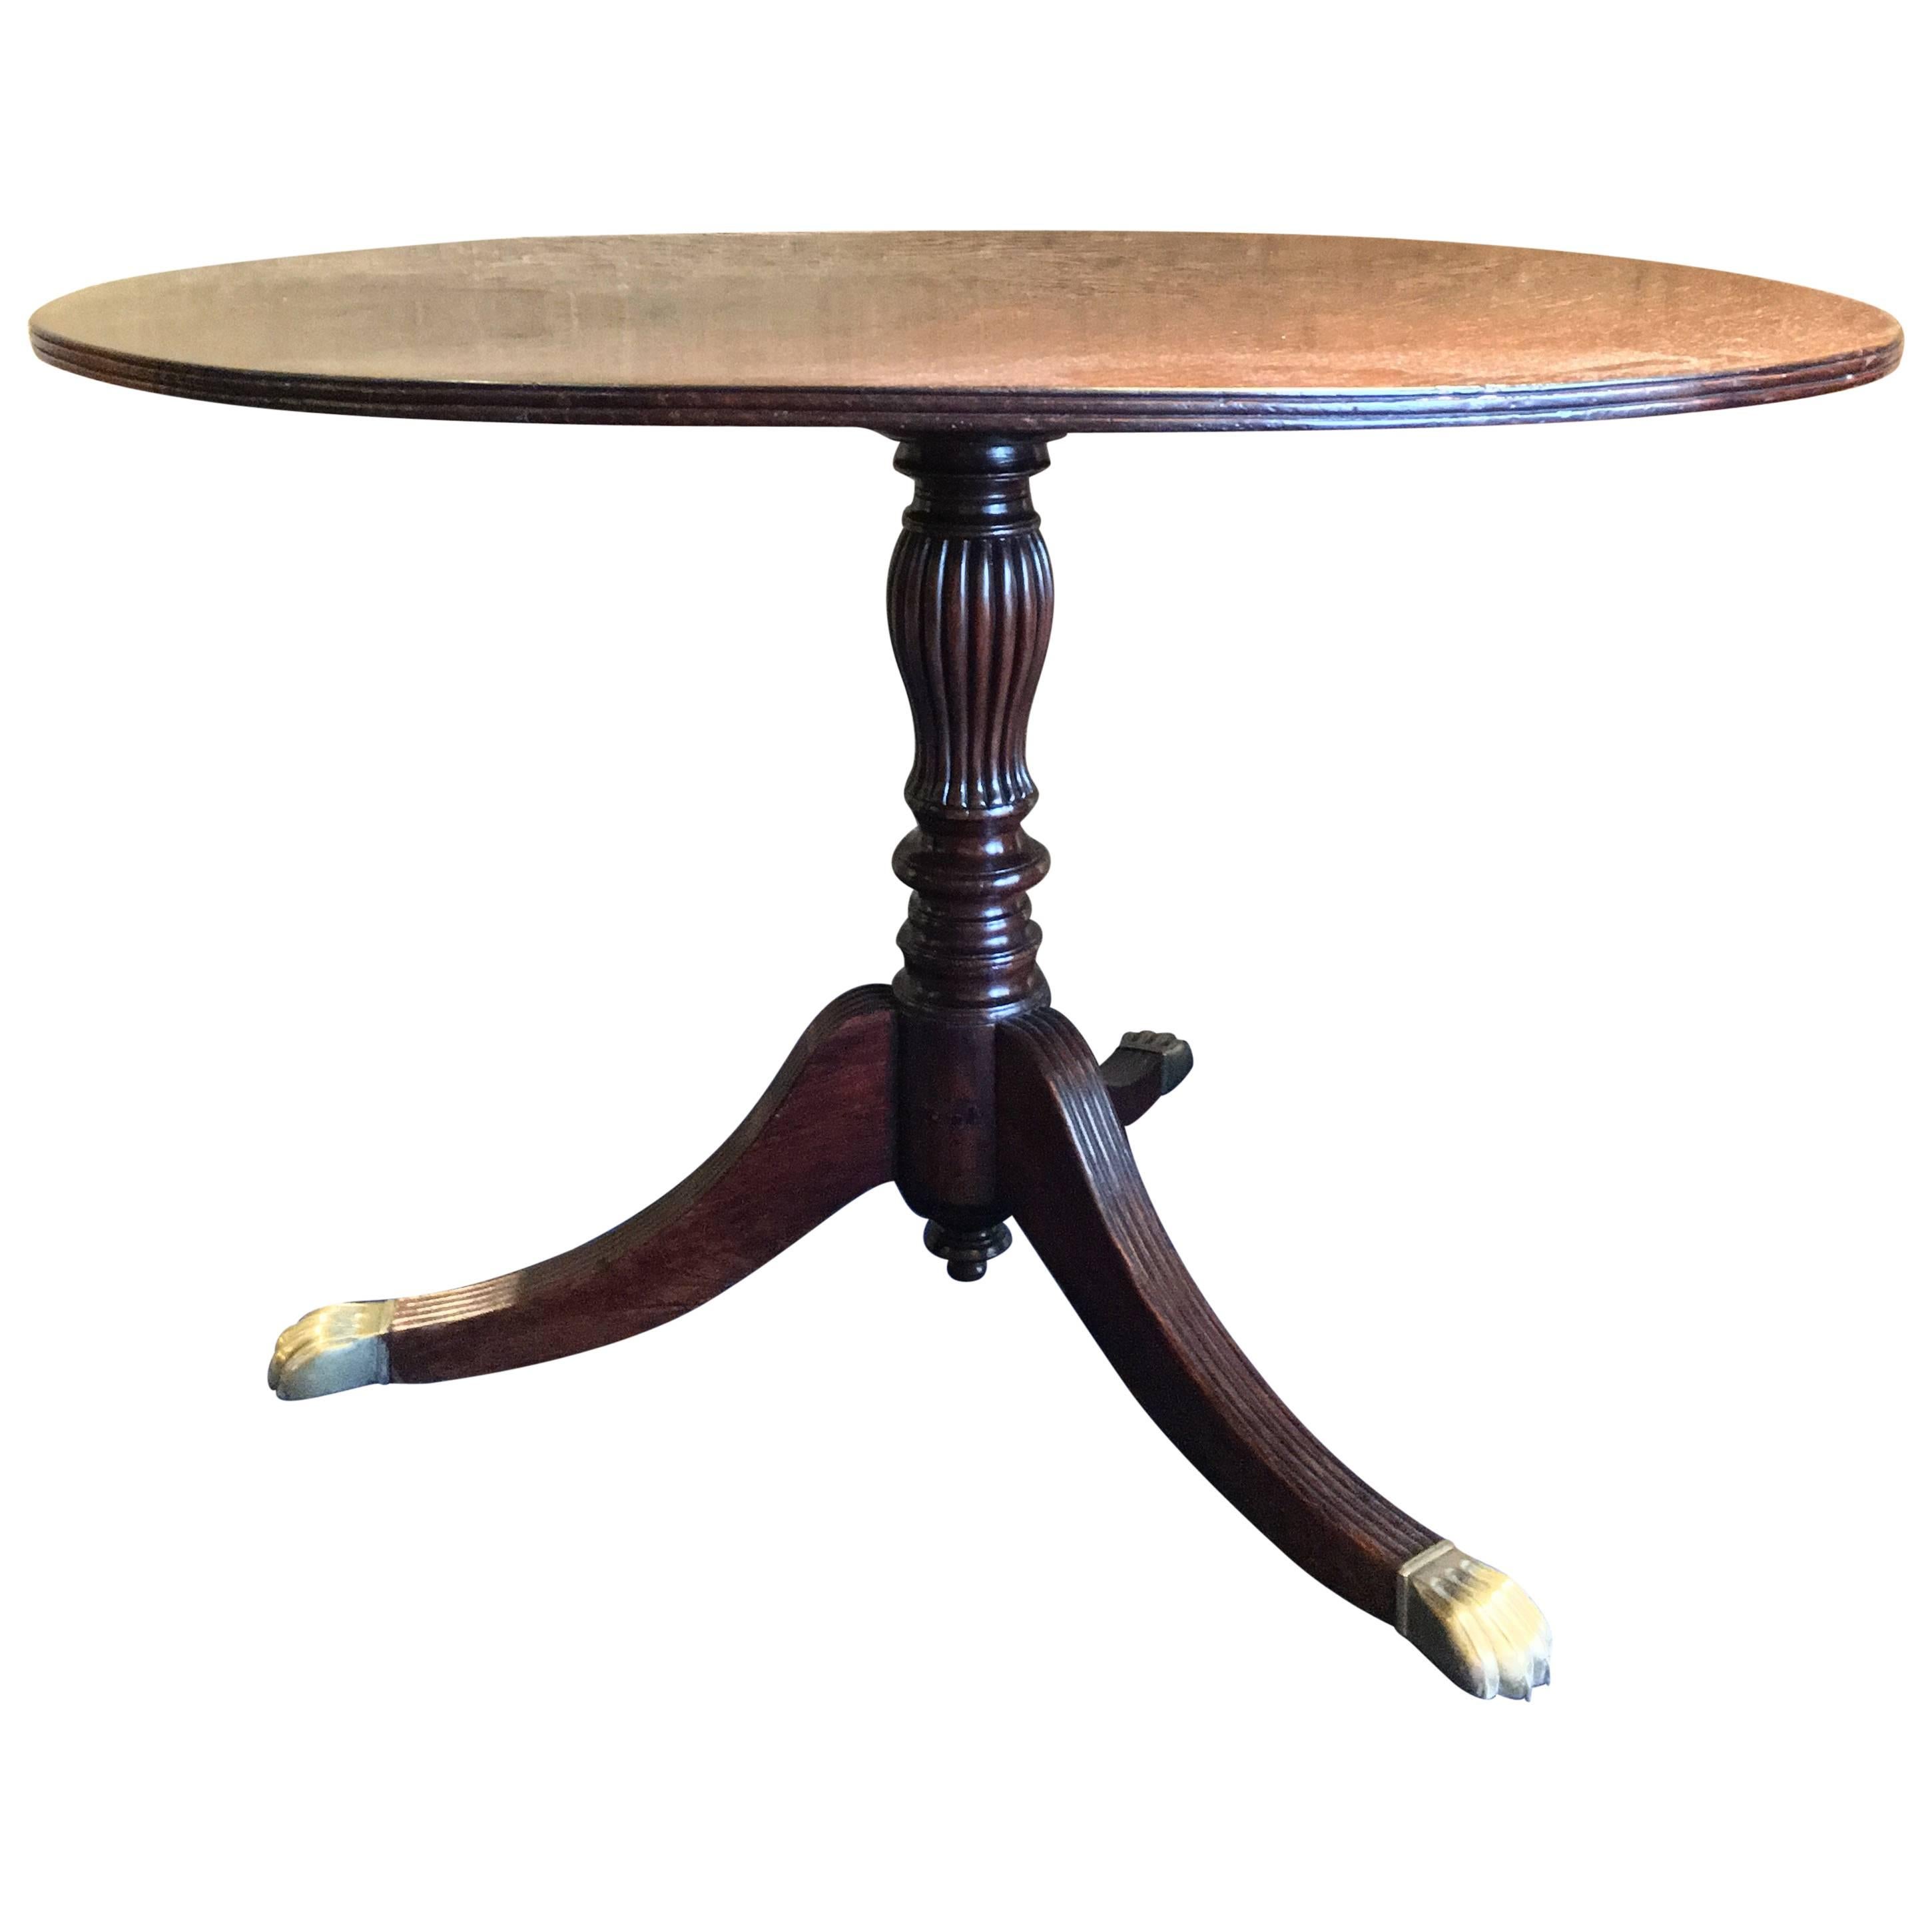 Vintage Wooden Round Dining Table Lions on the Brass Feet, 1940, Italy For Sale